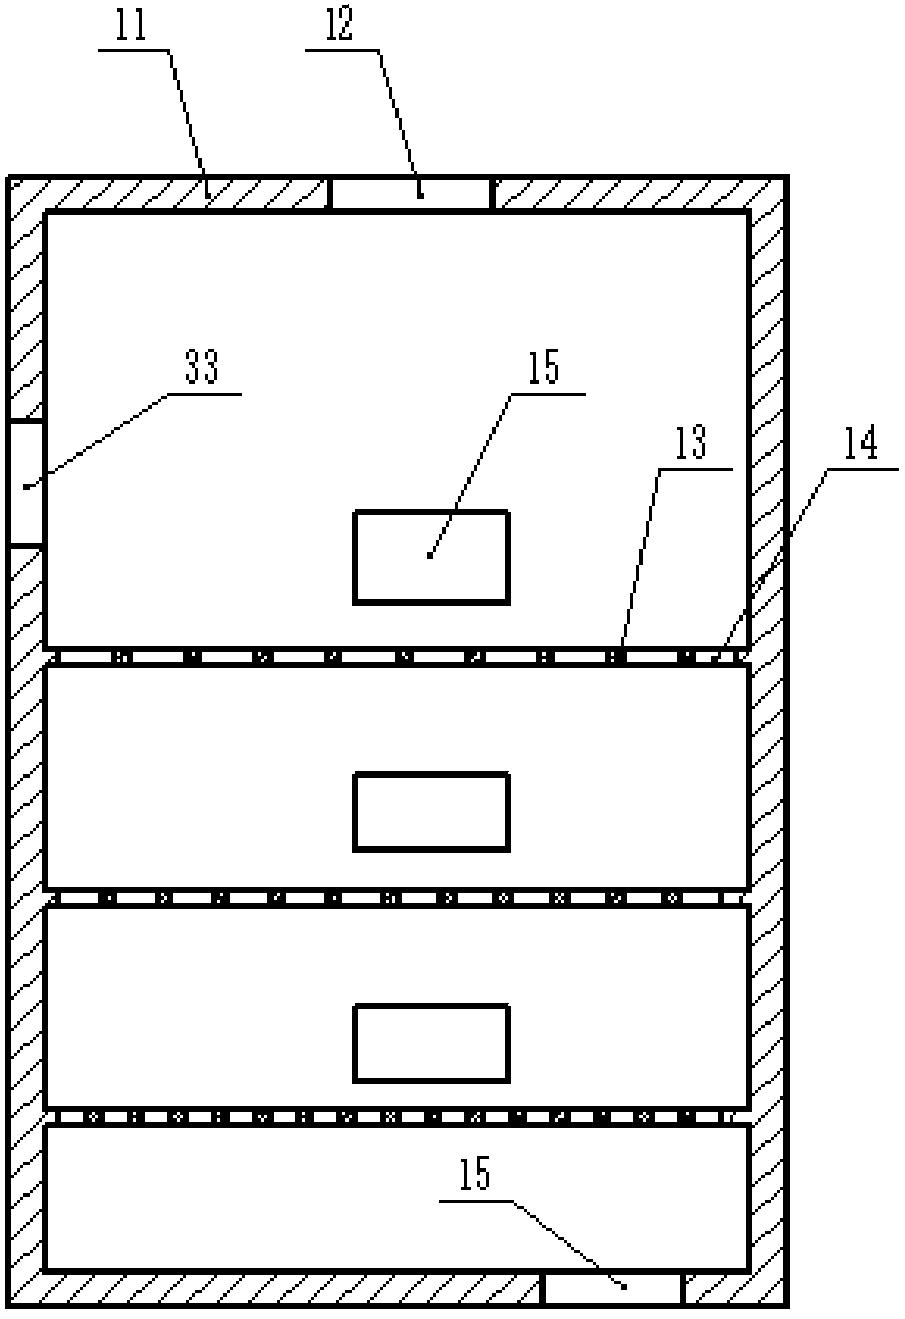 Plastic particle screening device